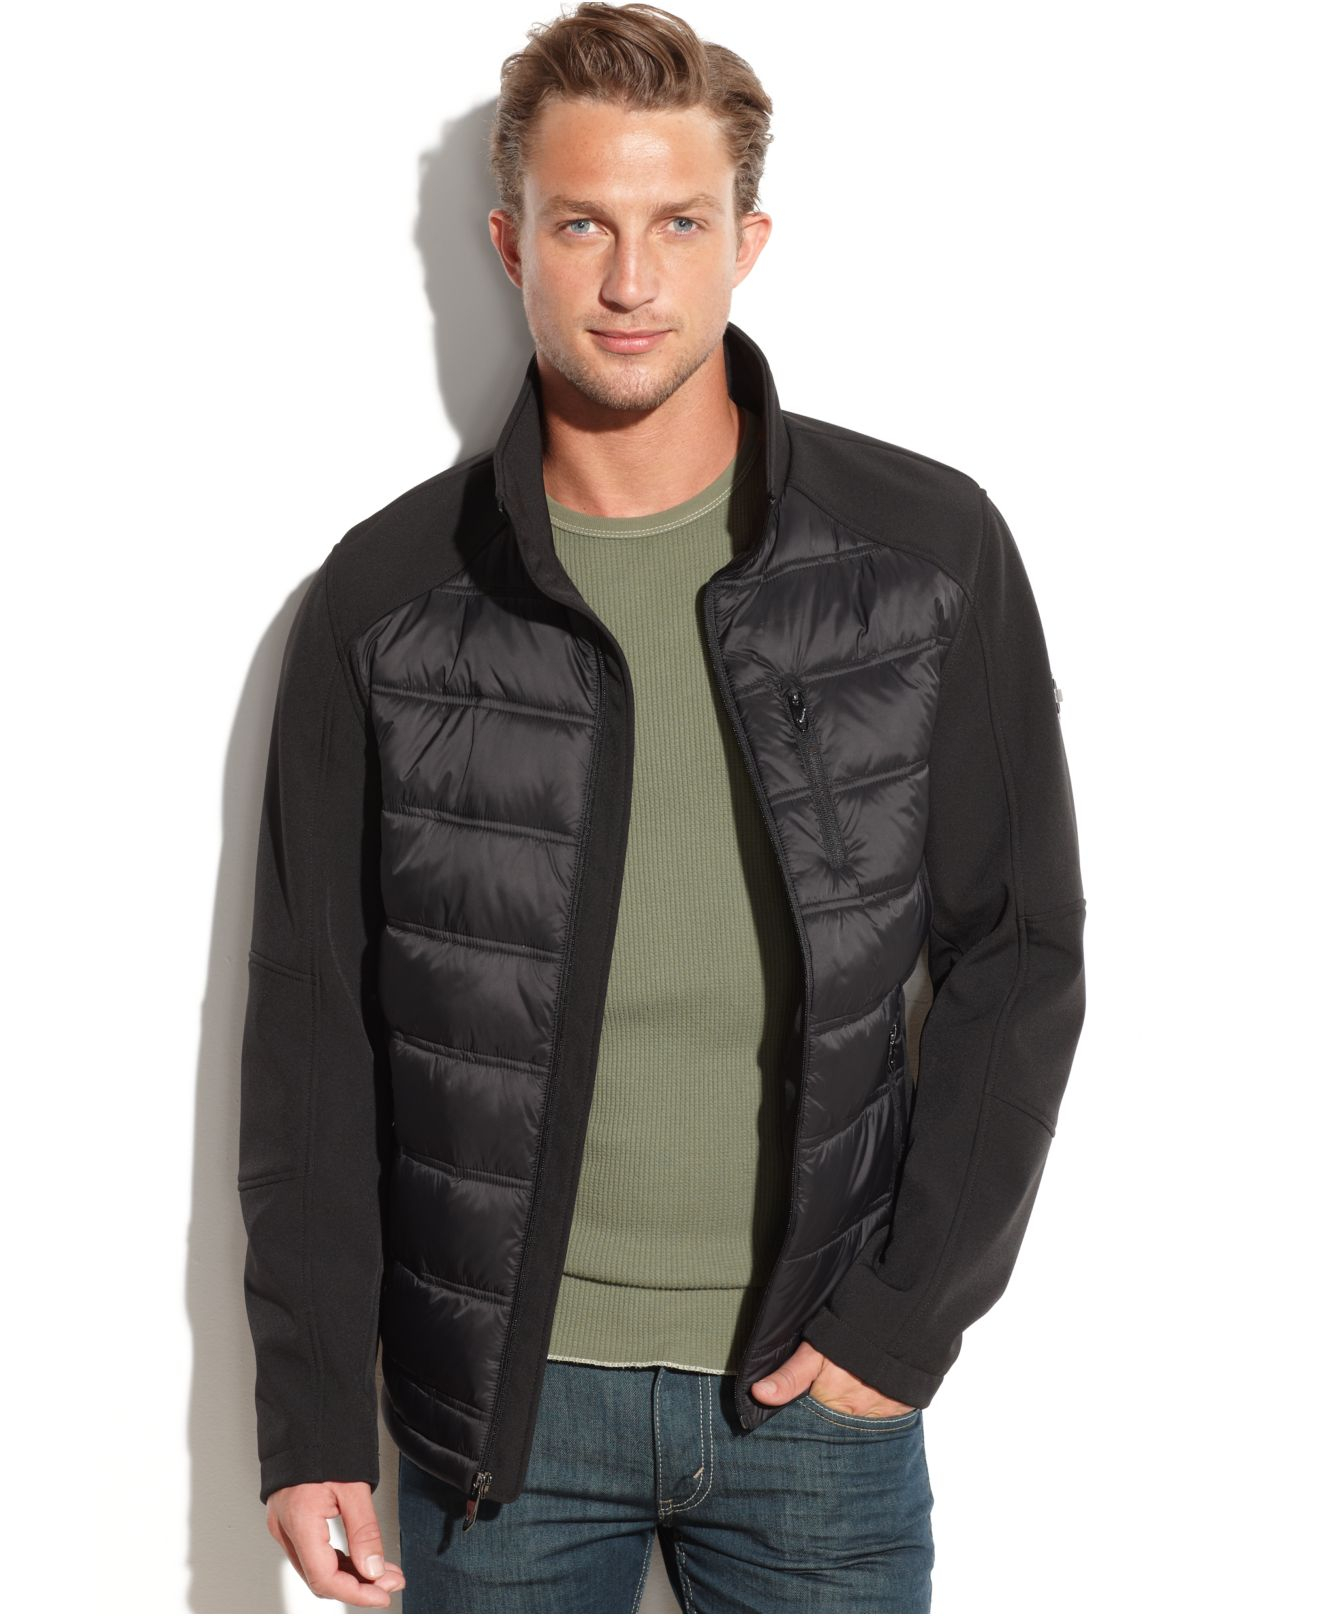 Calvin Klein Mixed-Media Quilted Jacket in Black for Men - Lyst